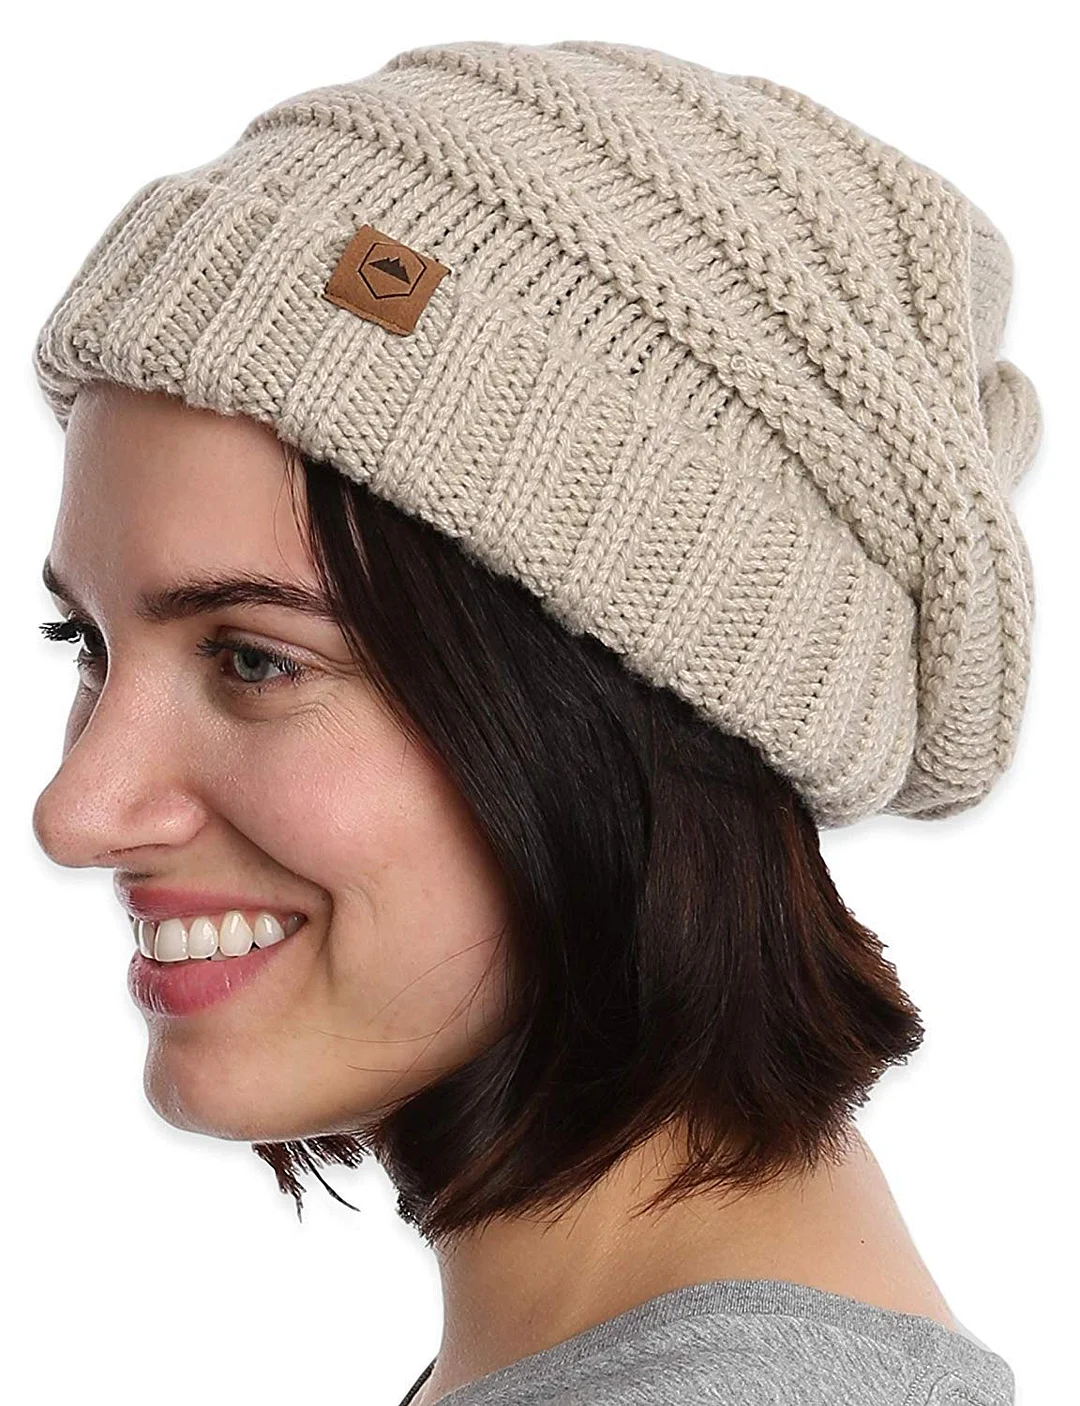 Warm & Cute Oversized Slouch Beanie Winter Hats - Thick, Chunky & Soft Stretch Knitted Caps for Cold Weather